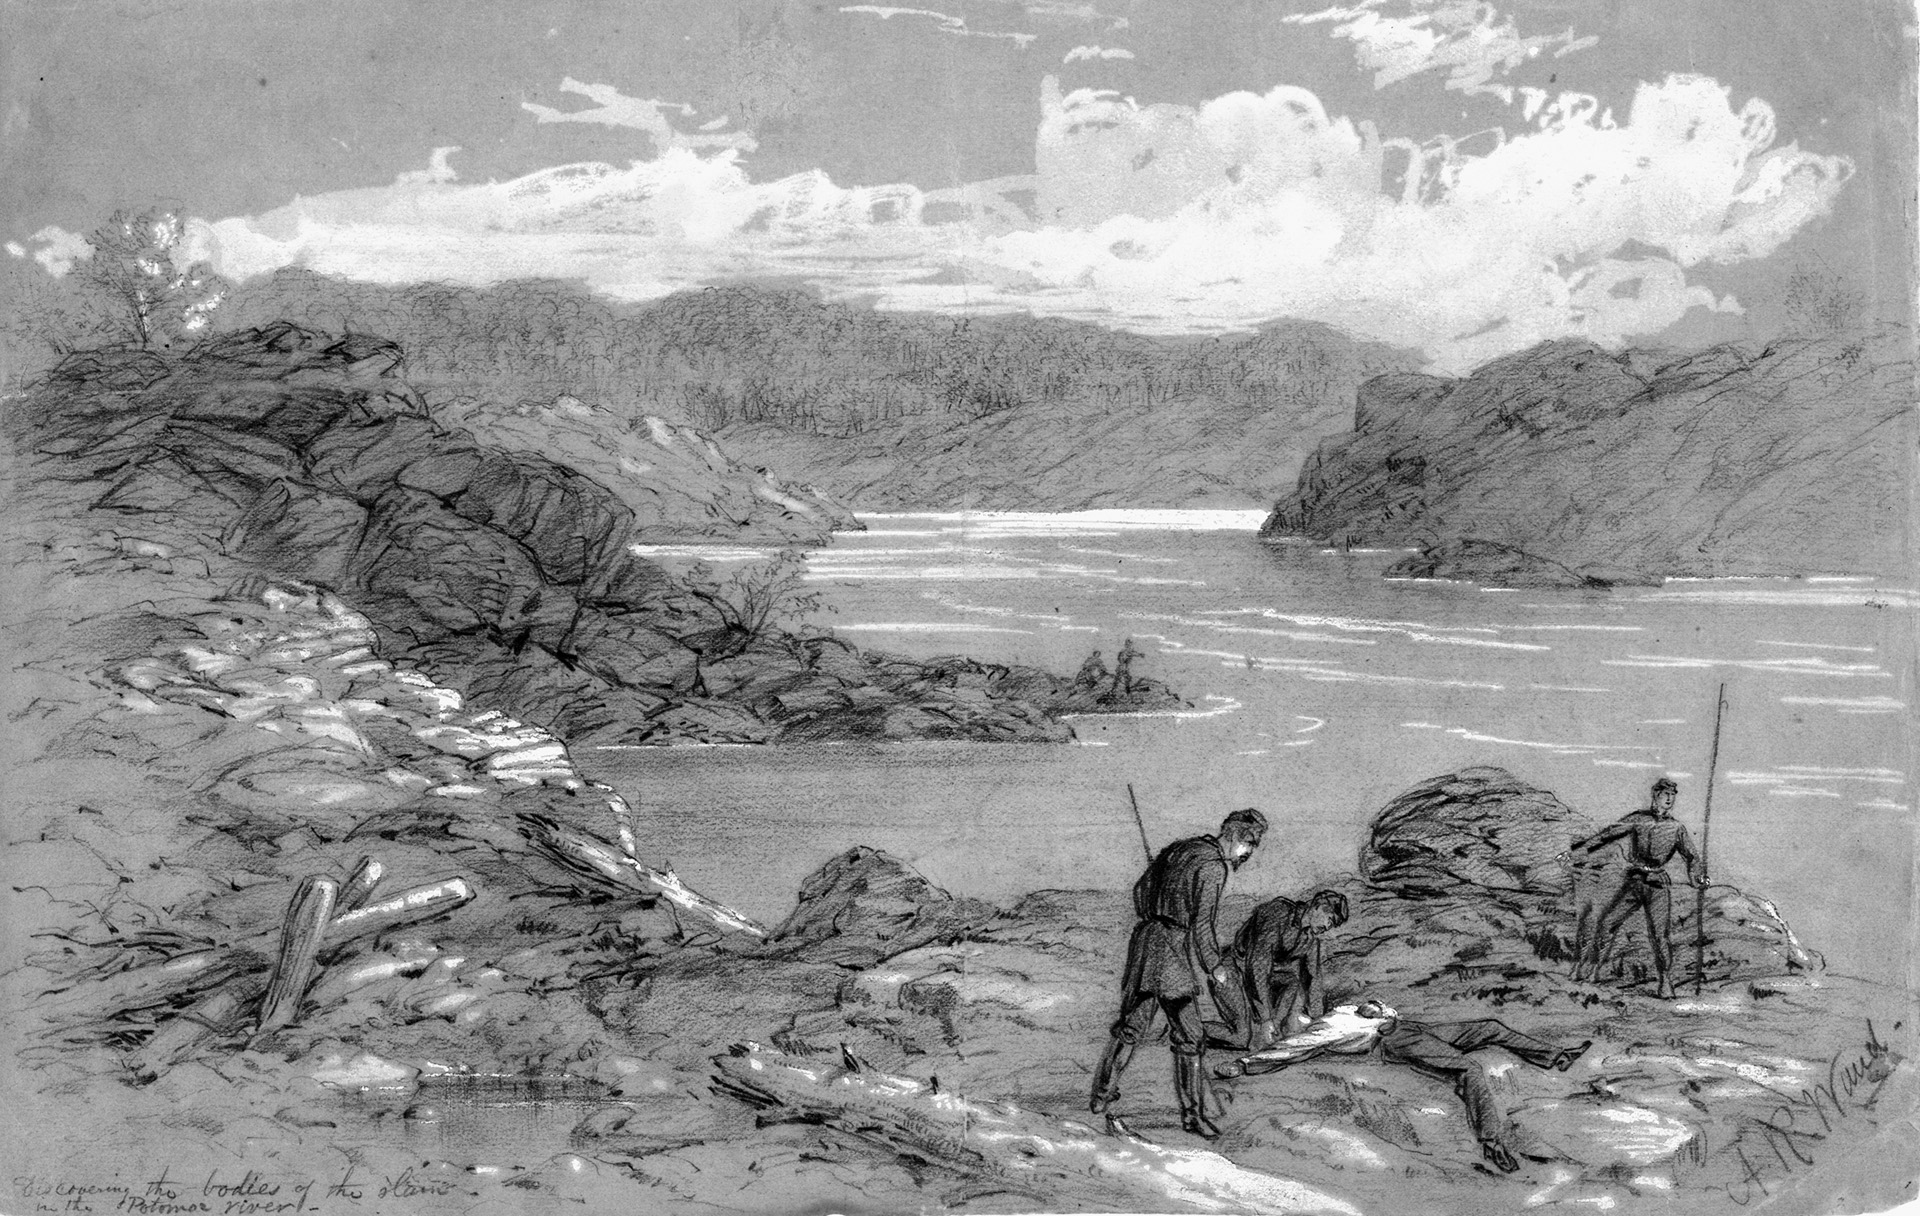 A Union patrol goes about the sad duty of collecting the bodies of their fallen comrades along the Potomac River after the battle. In the battle’s aftermath, Stone became the first target of the vindictive Joint Committee on the Conduct of the War.